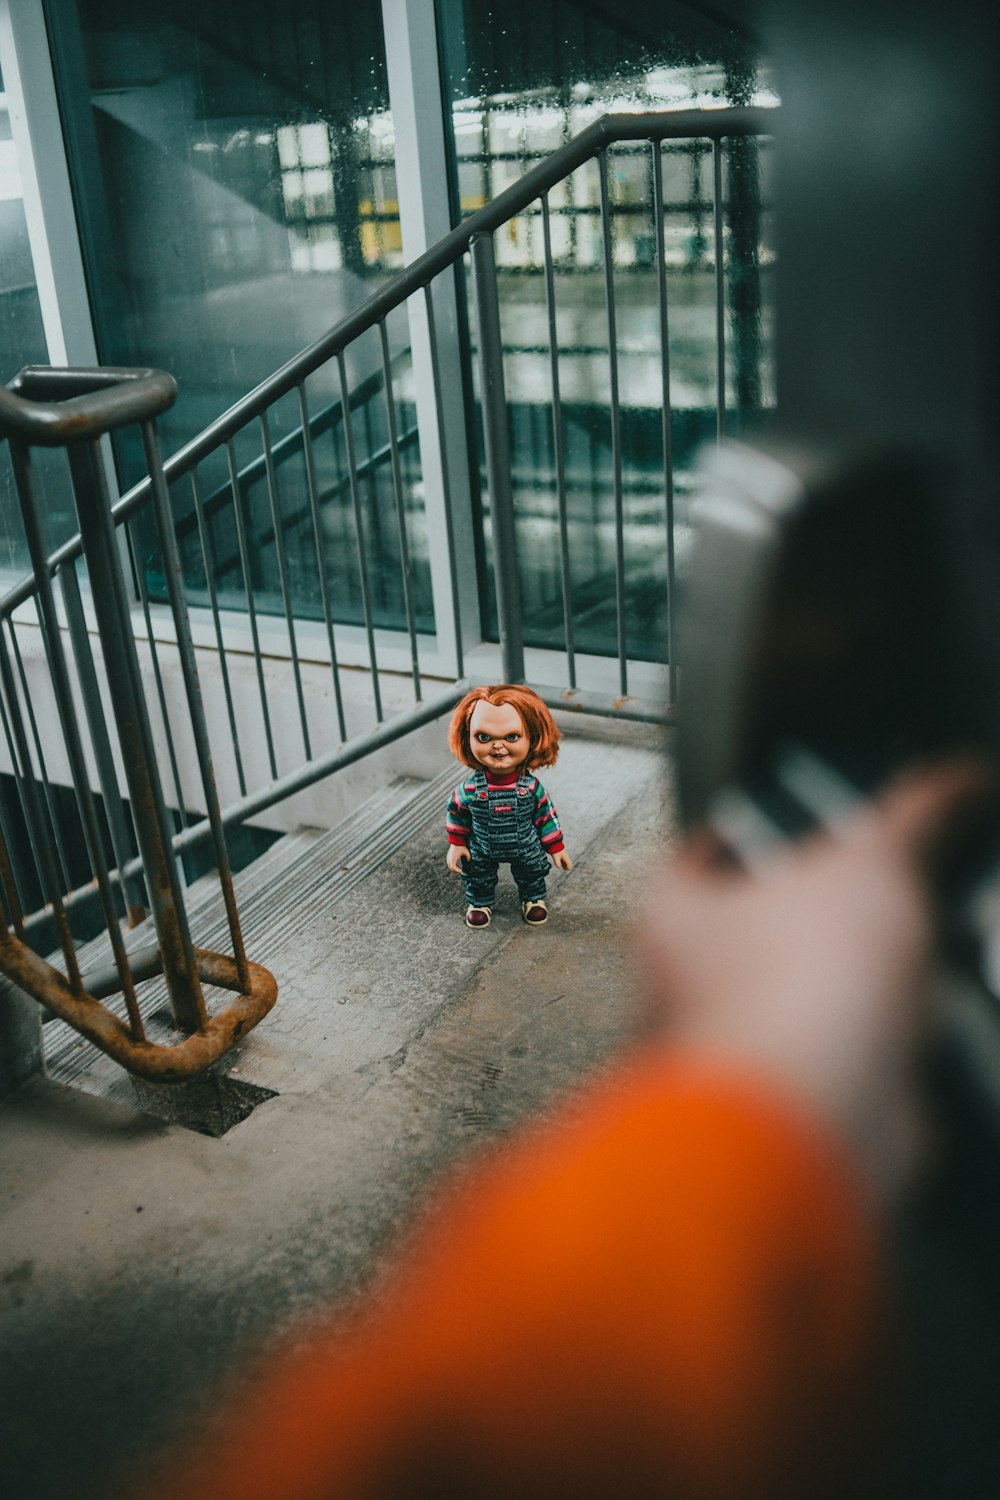 a person taking a picture of a small doll